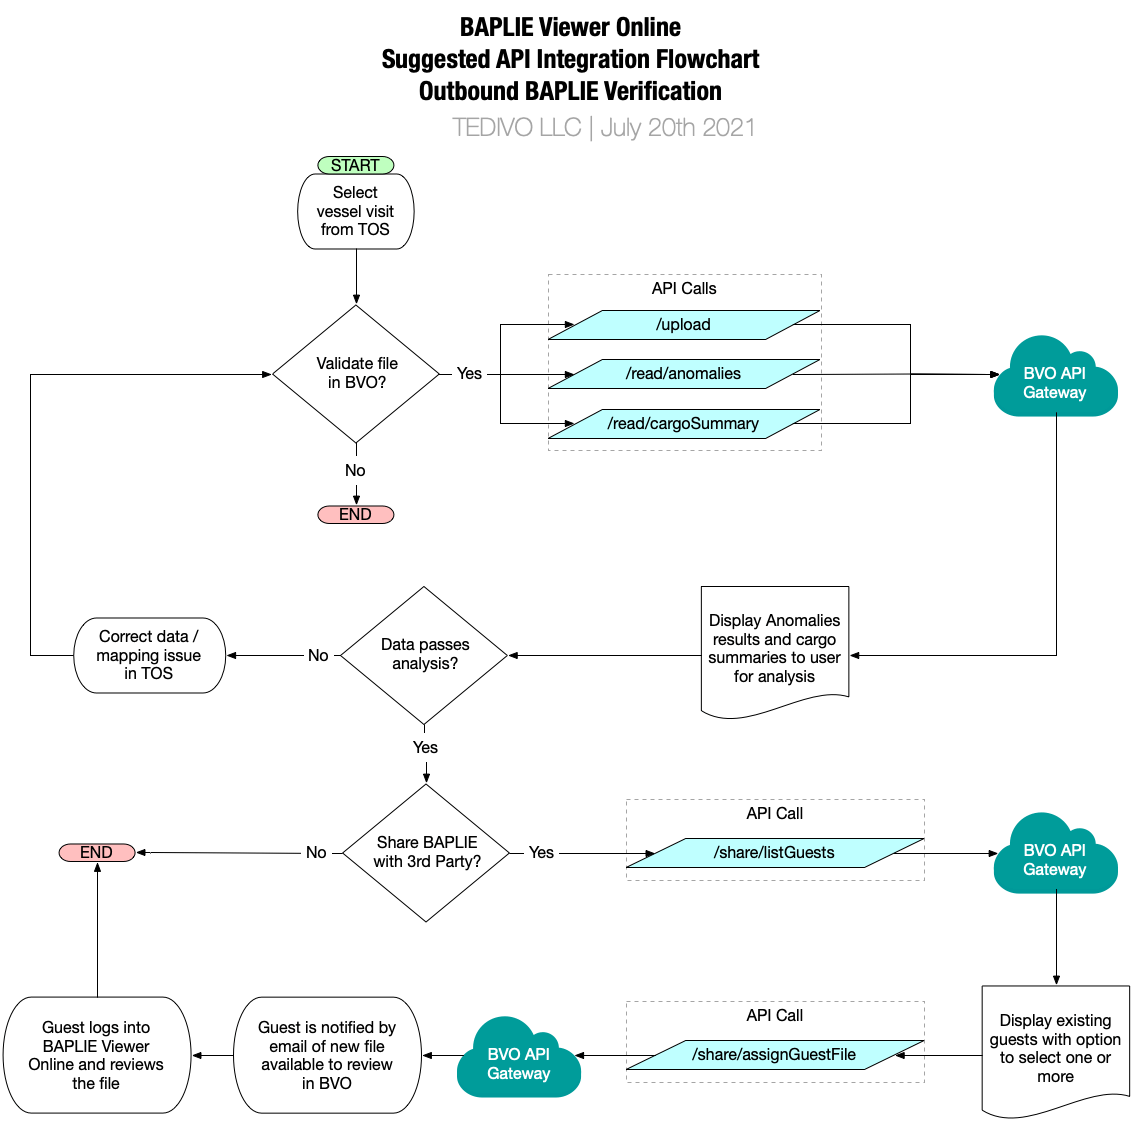 Integration example outbound